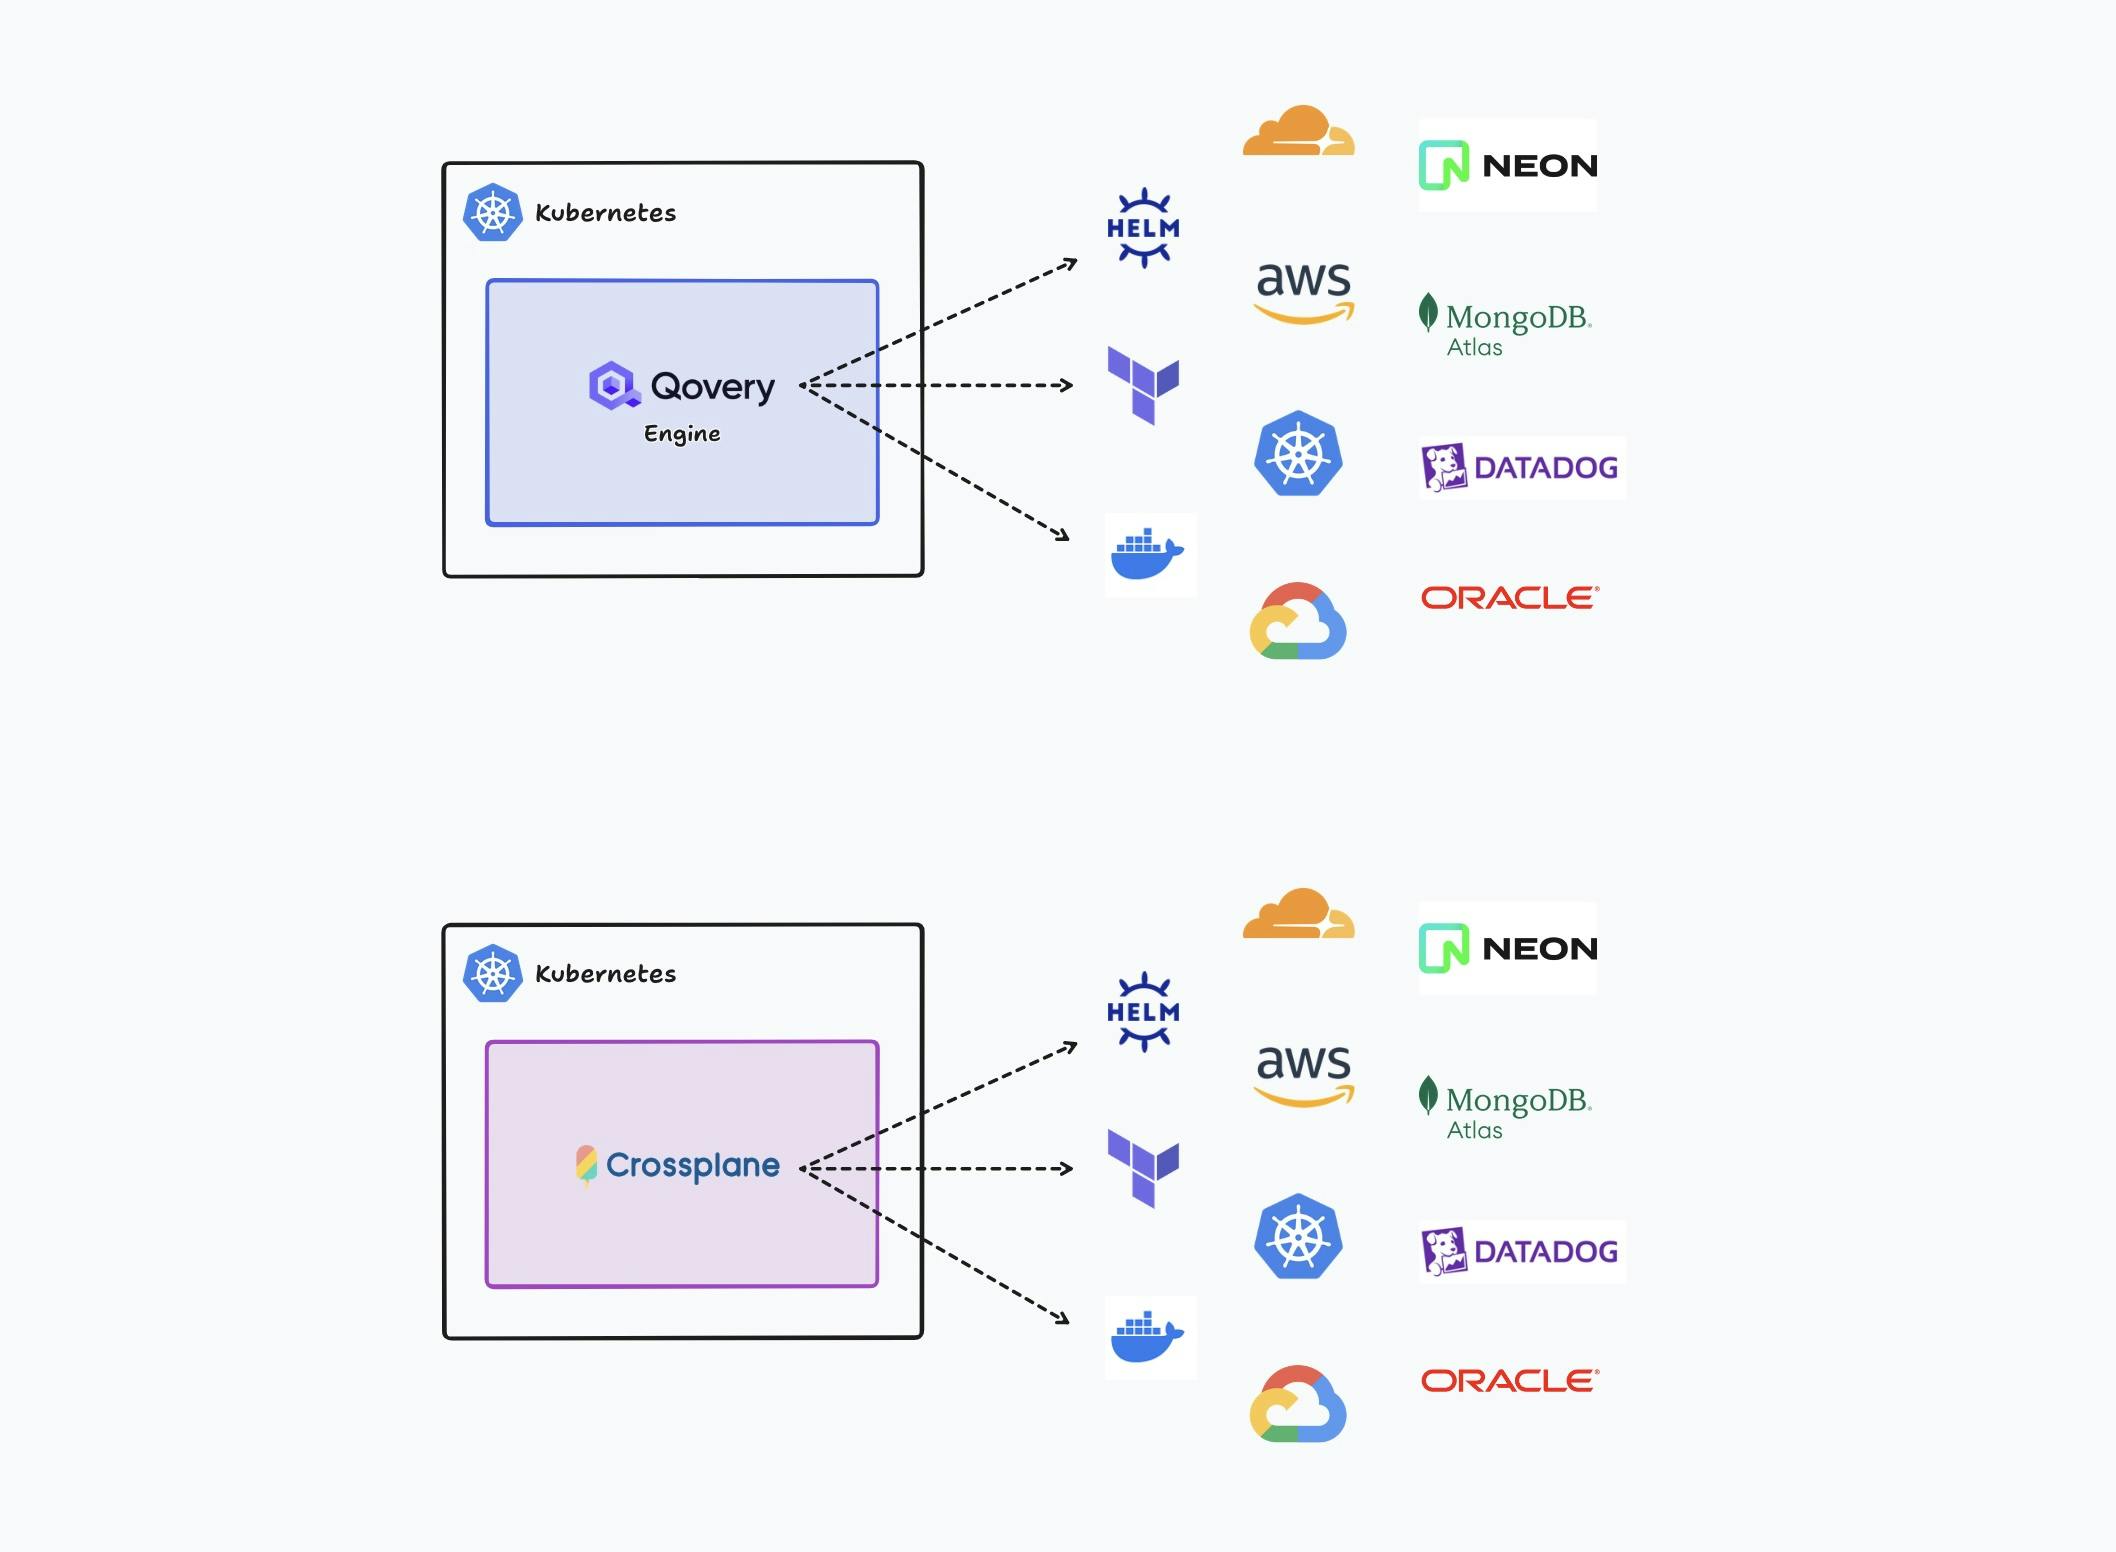 Qovery and Crossplane are both built to manage inner and external resources at Kubernetes